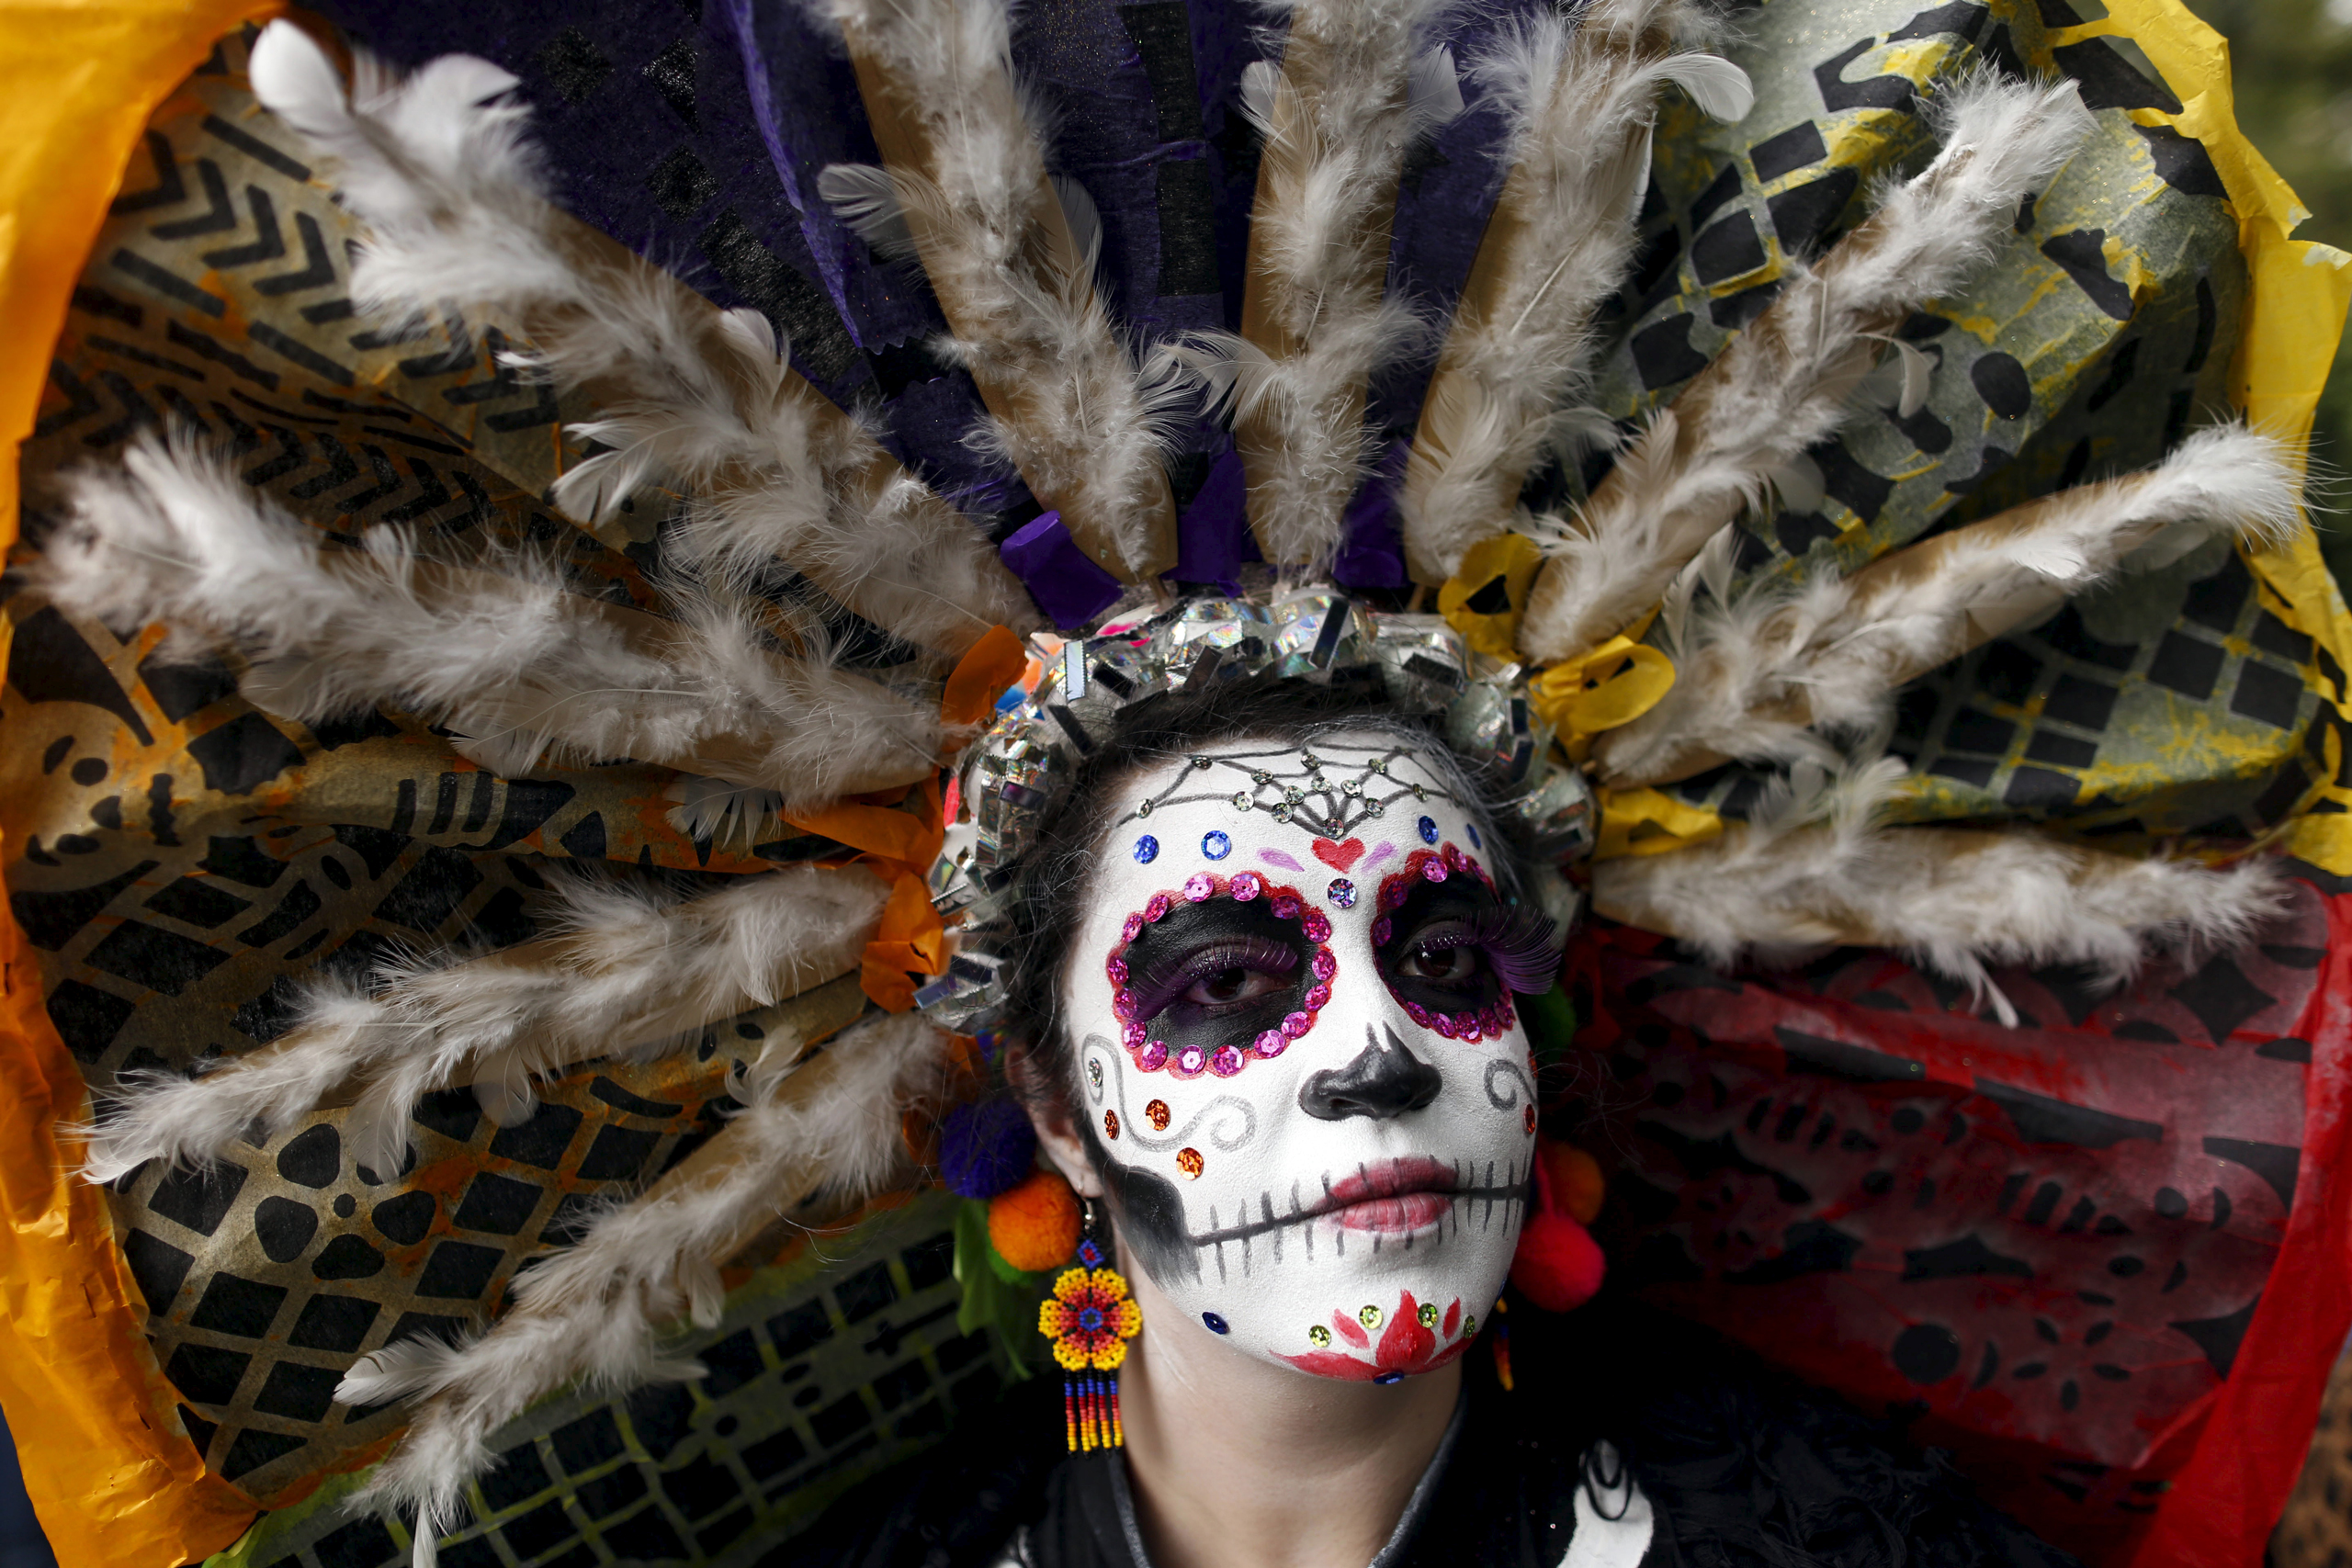 A woman with her face painted to look like the popular Mexican figure called "Catrina", poses for a photograph as she takes part in the annual Catrina Fest in Mexico City on Nov. 1, 2015. (Carlos Jasso—Reuters)